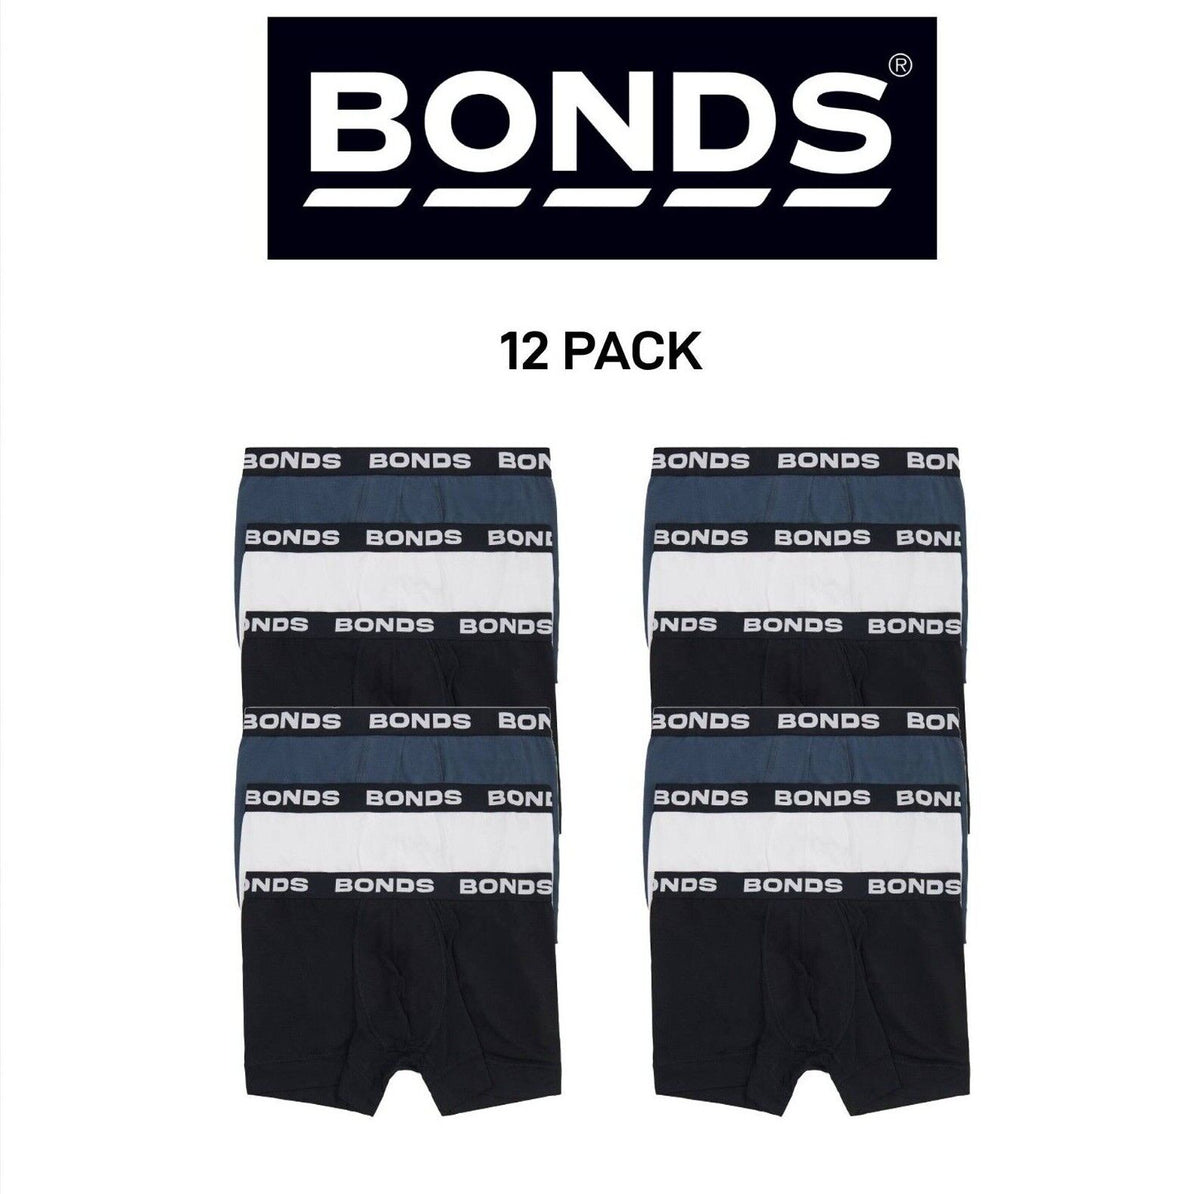 Bonds Mens Total Package Trunk Comfy Super Soft and Breathable 12 Pack MWK83A